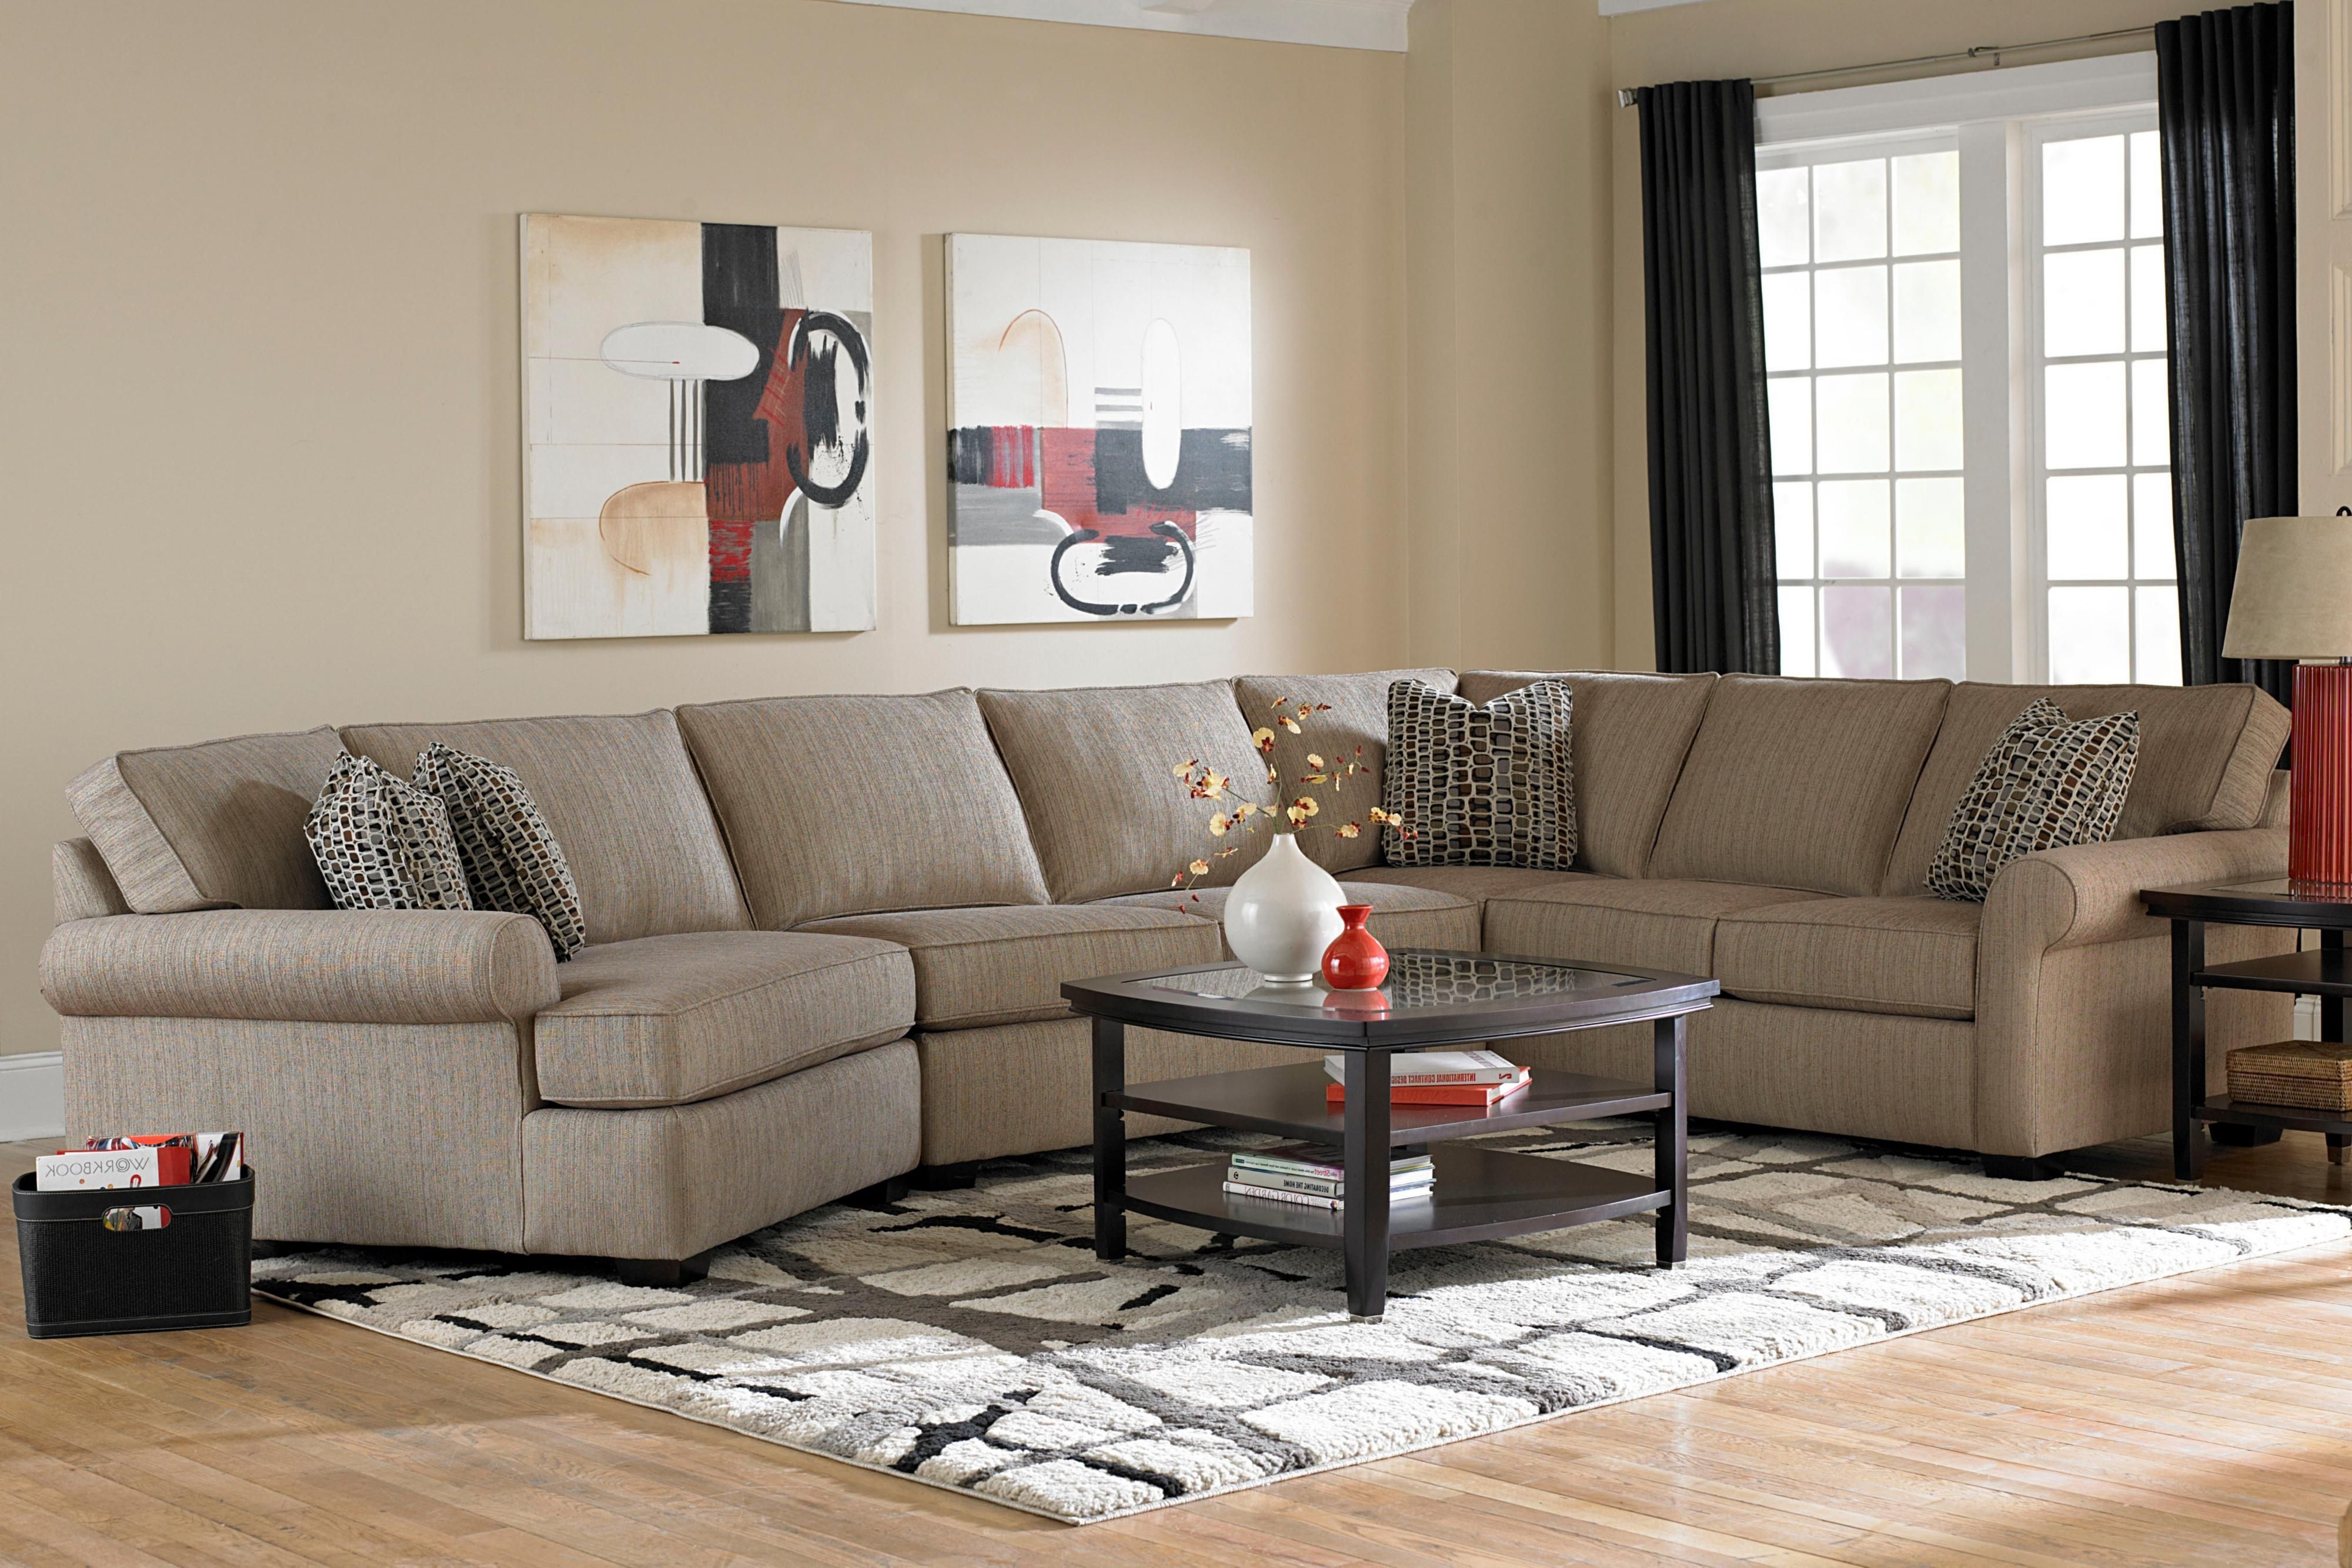 Sectional Sofas At Broyhill Throughout Well Liked Broyhill Furniture Ethan Transitional Sectional Sofa With Right (View 10 of 15)